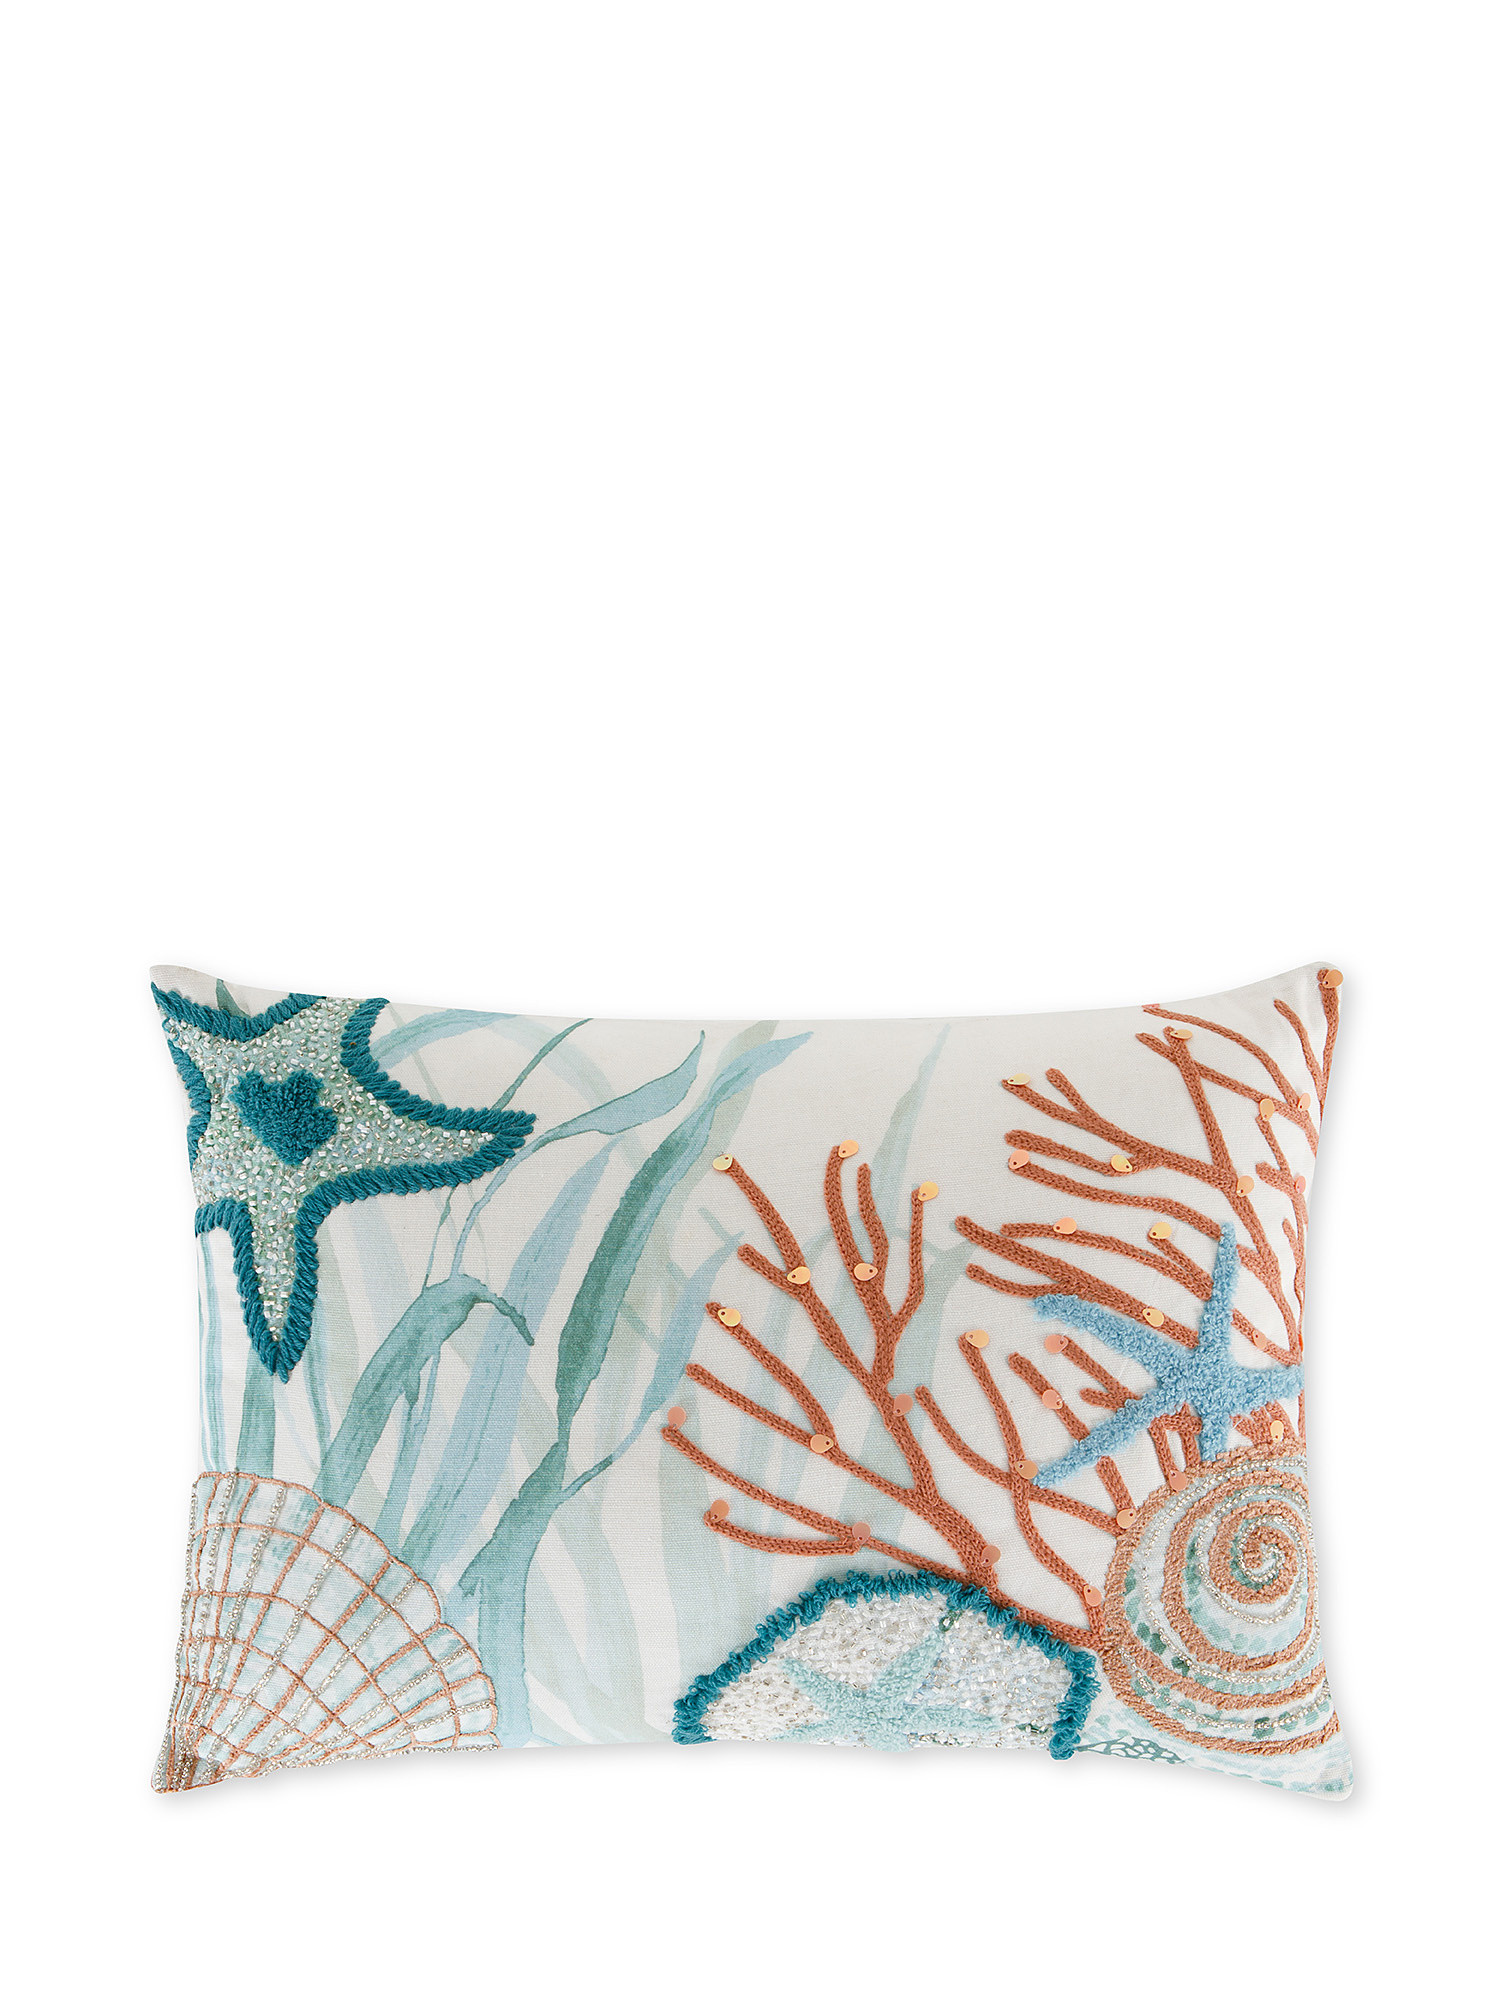 Coral embroidery cushion 35x50cm, White, large image number 0